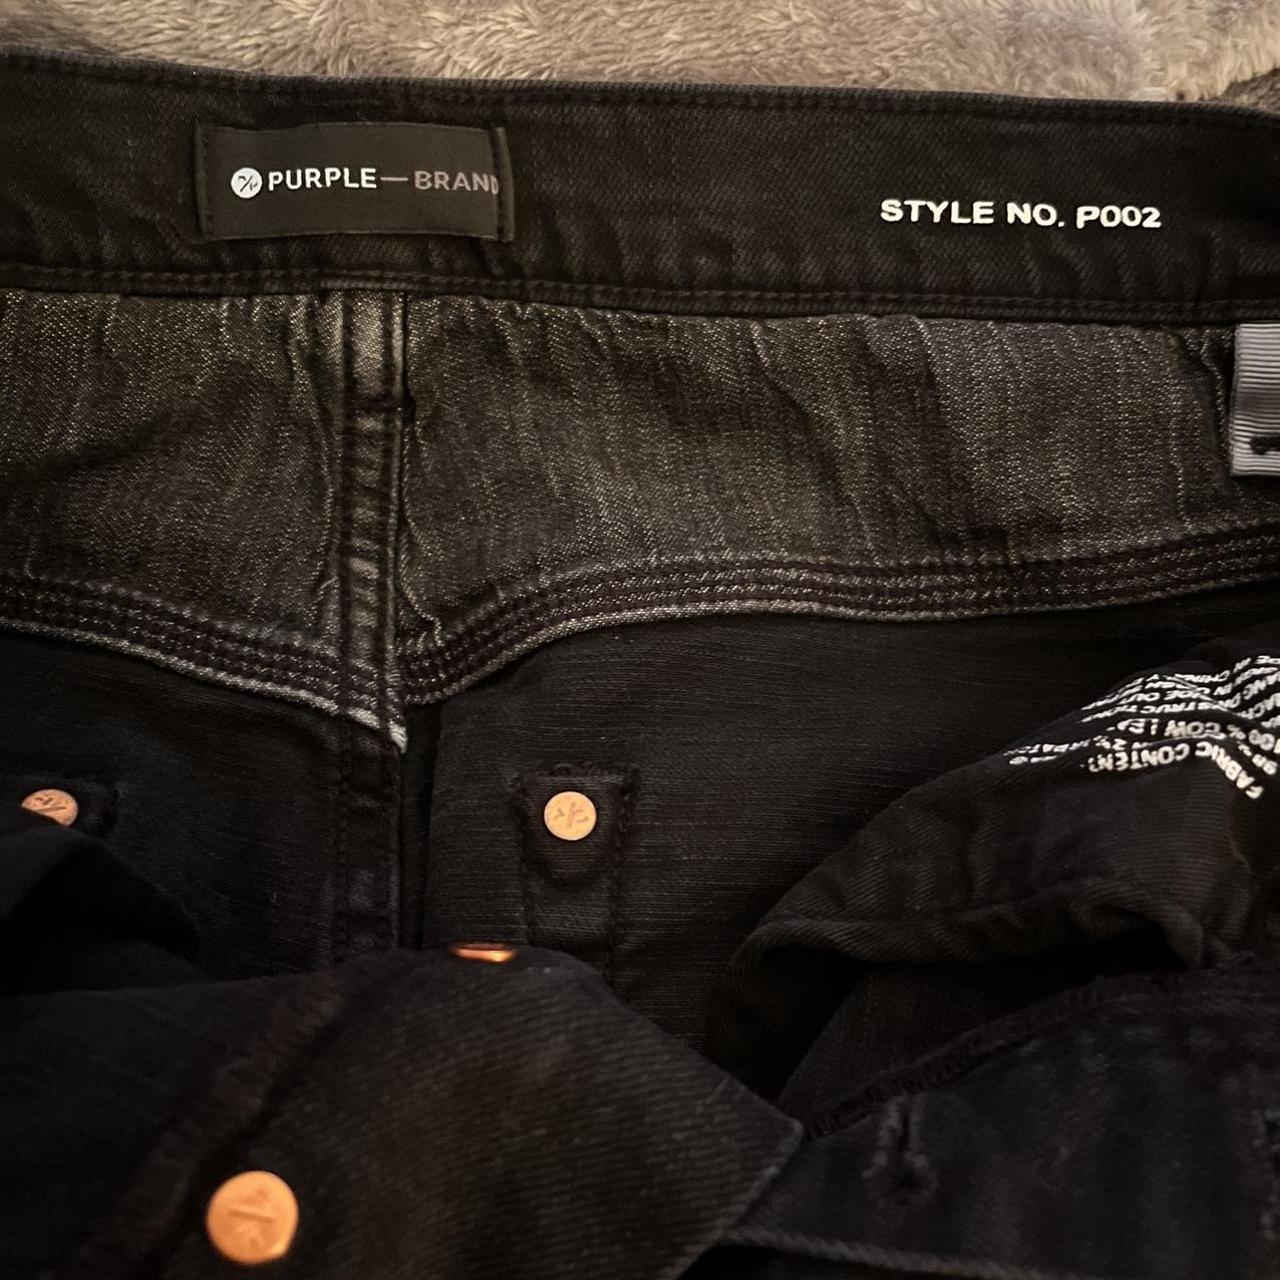 PURPLE BRAND P002 MID RISE SLIM JEANS Bought these - Depop